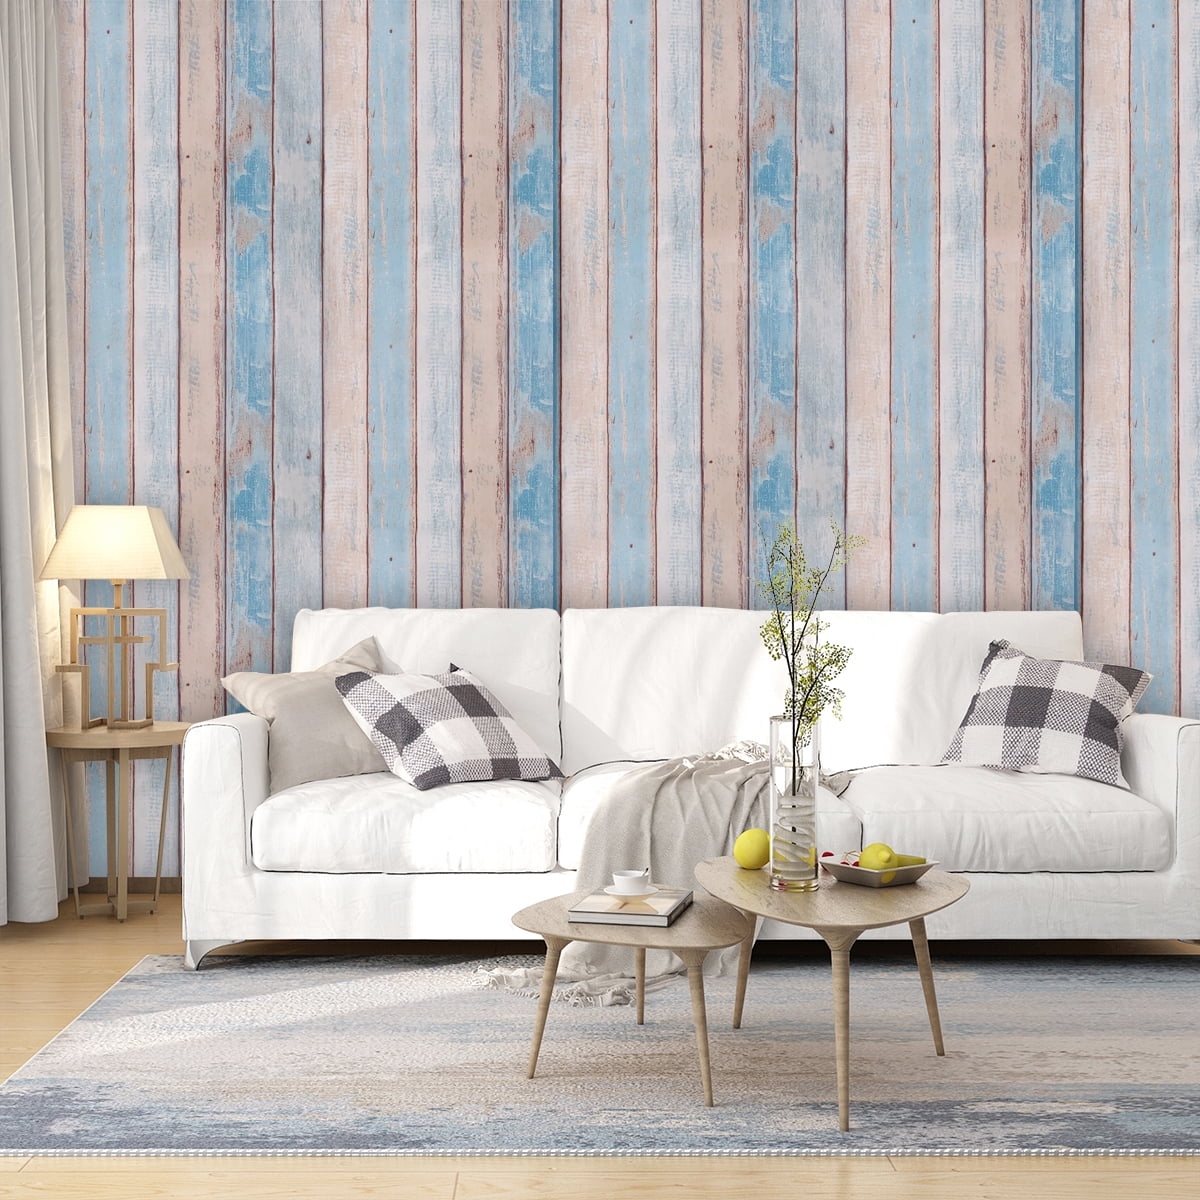 Blue Wood Wallpaper Contact Paper Self Adhesive Decorative Wall Covering Rolls 